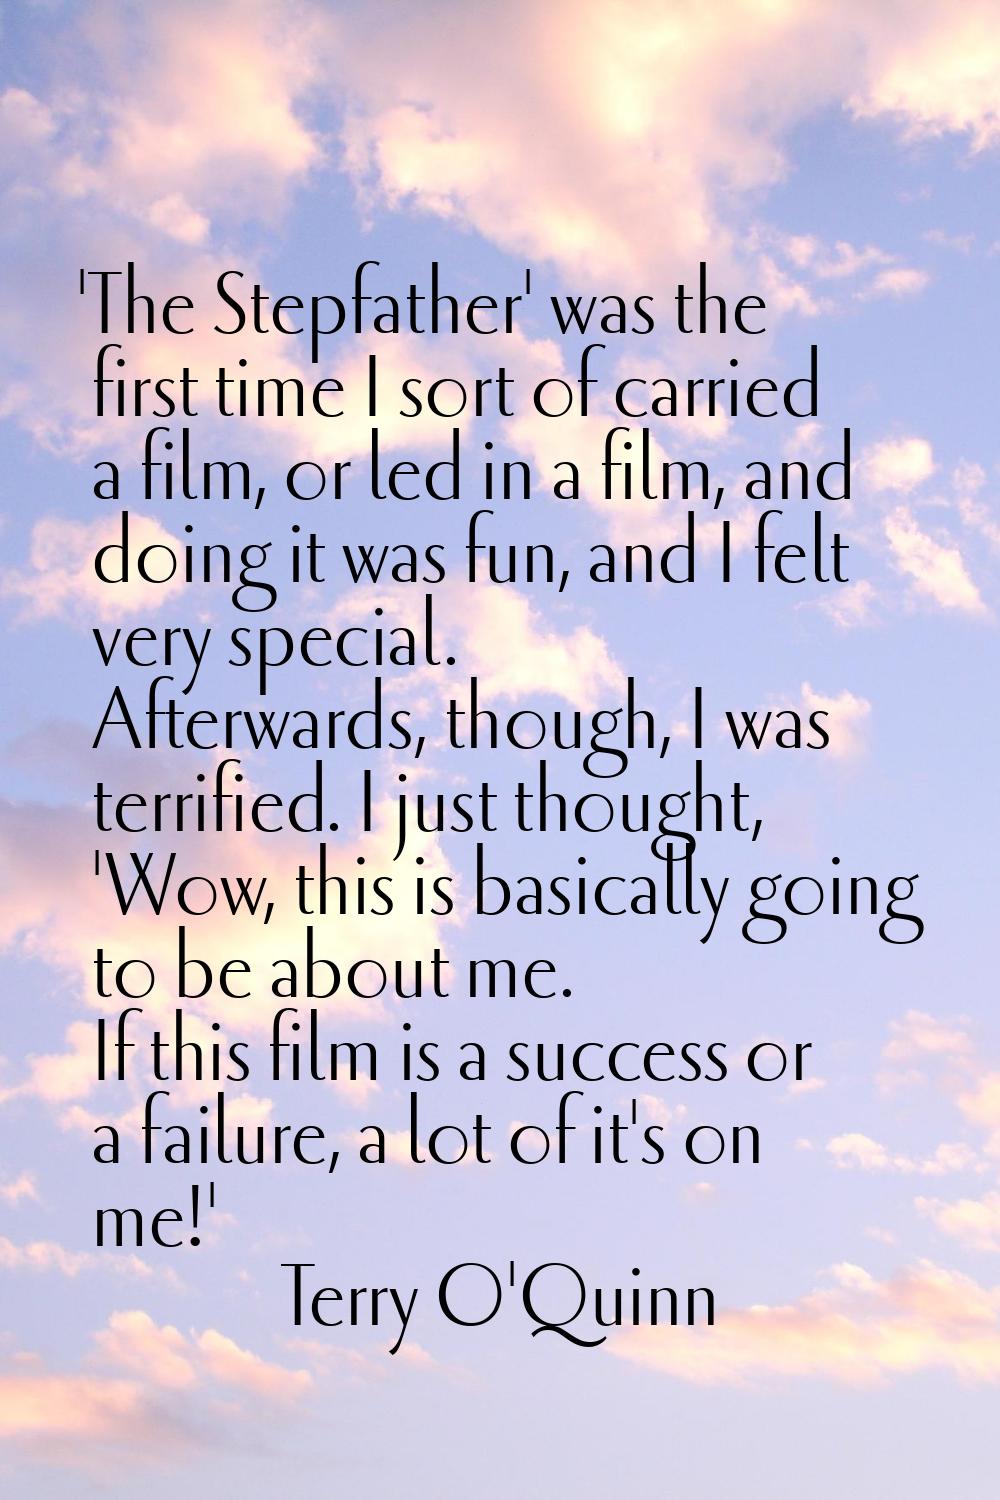 'The Stepfather' was the first time I sort of carried a film, or led in a film, and doing it was fu